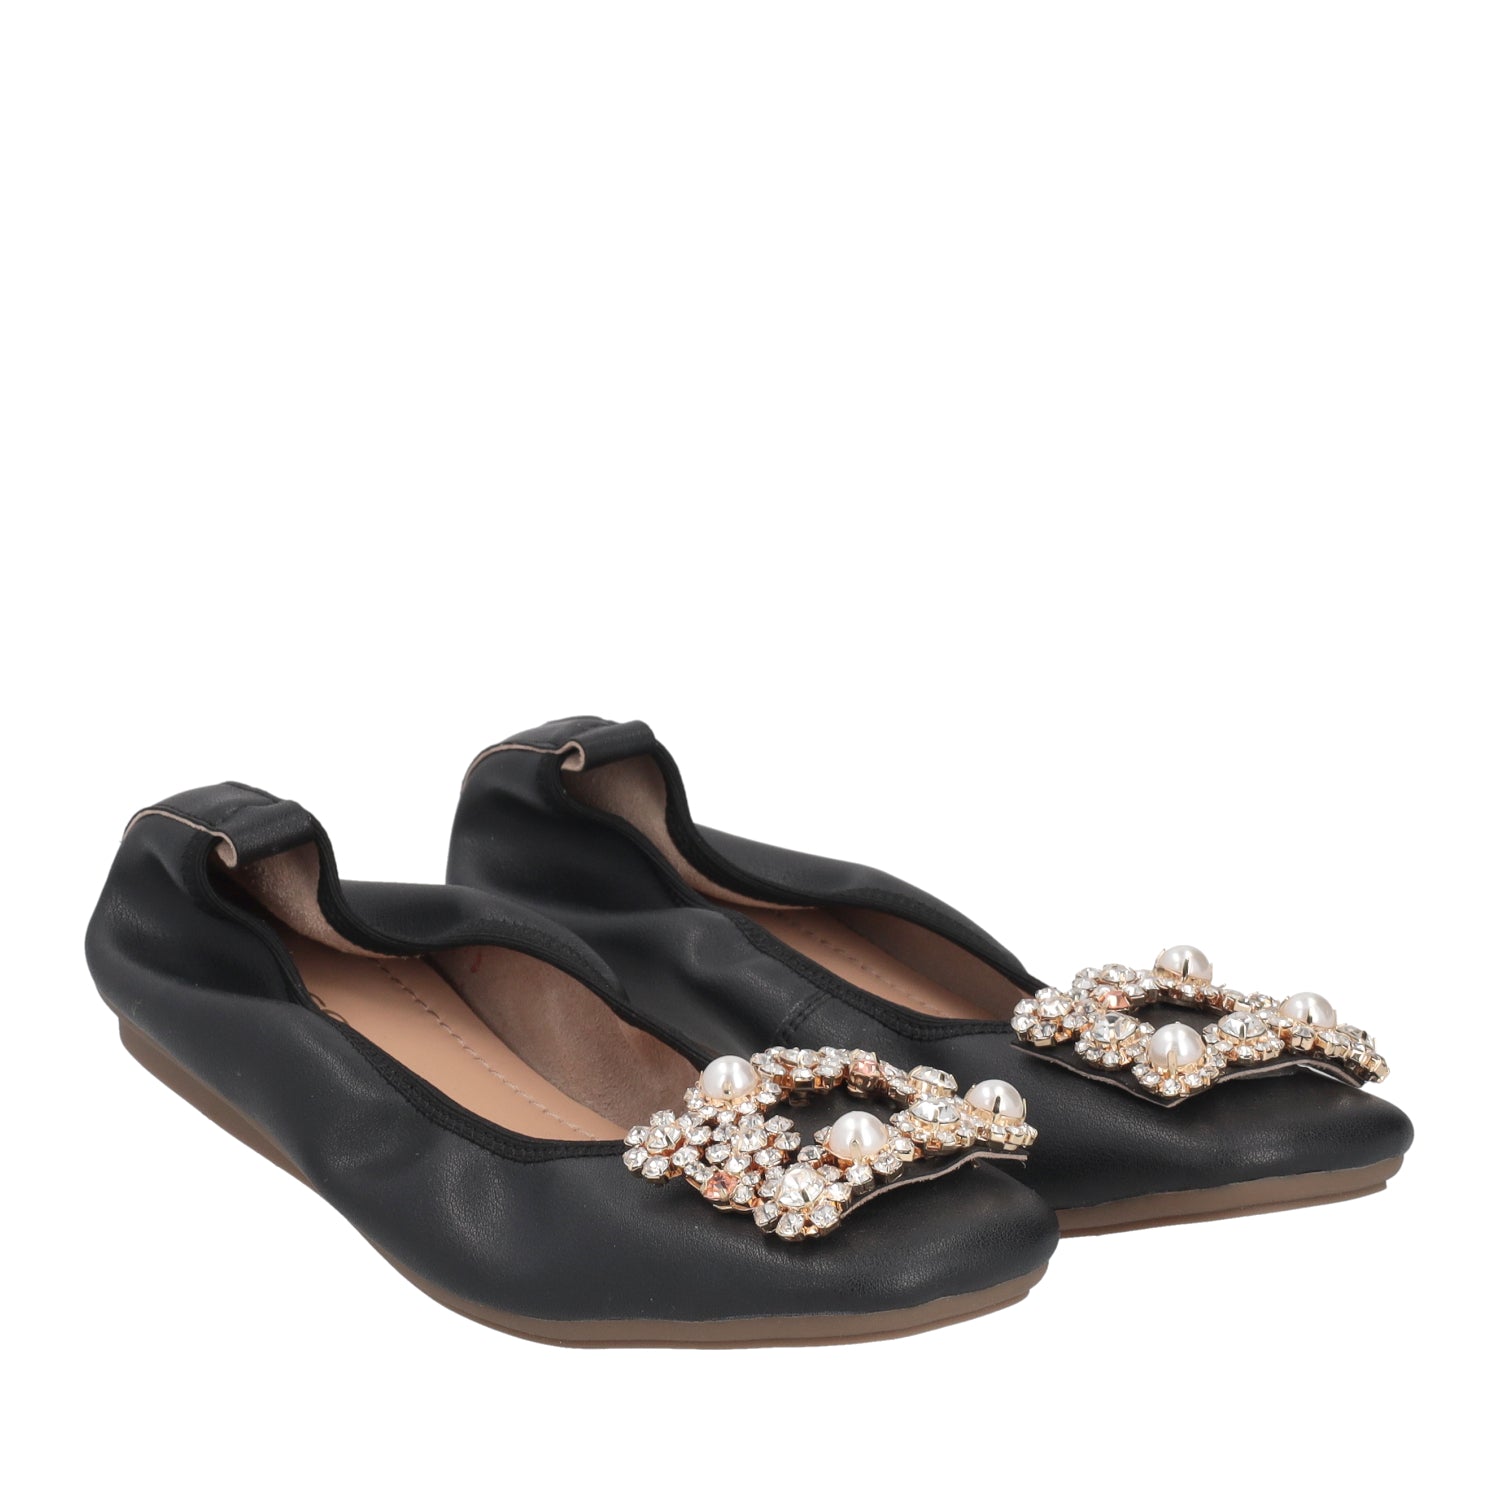 BLACK BETTY BALLERINA SHOES WITH JEWEL ACCESSORY